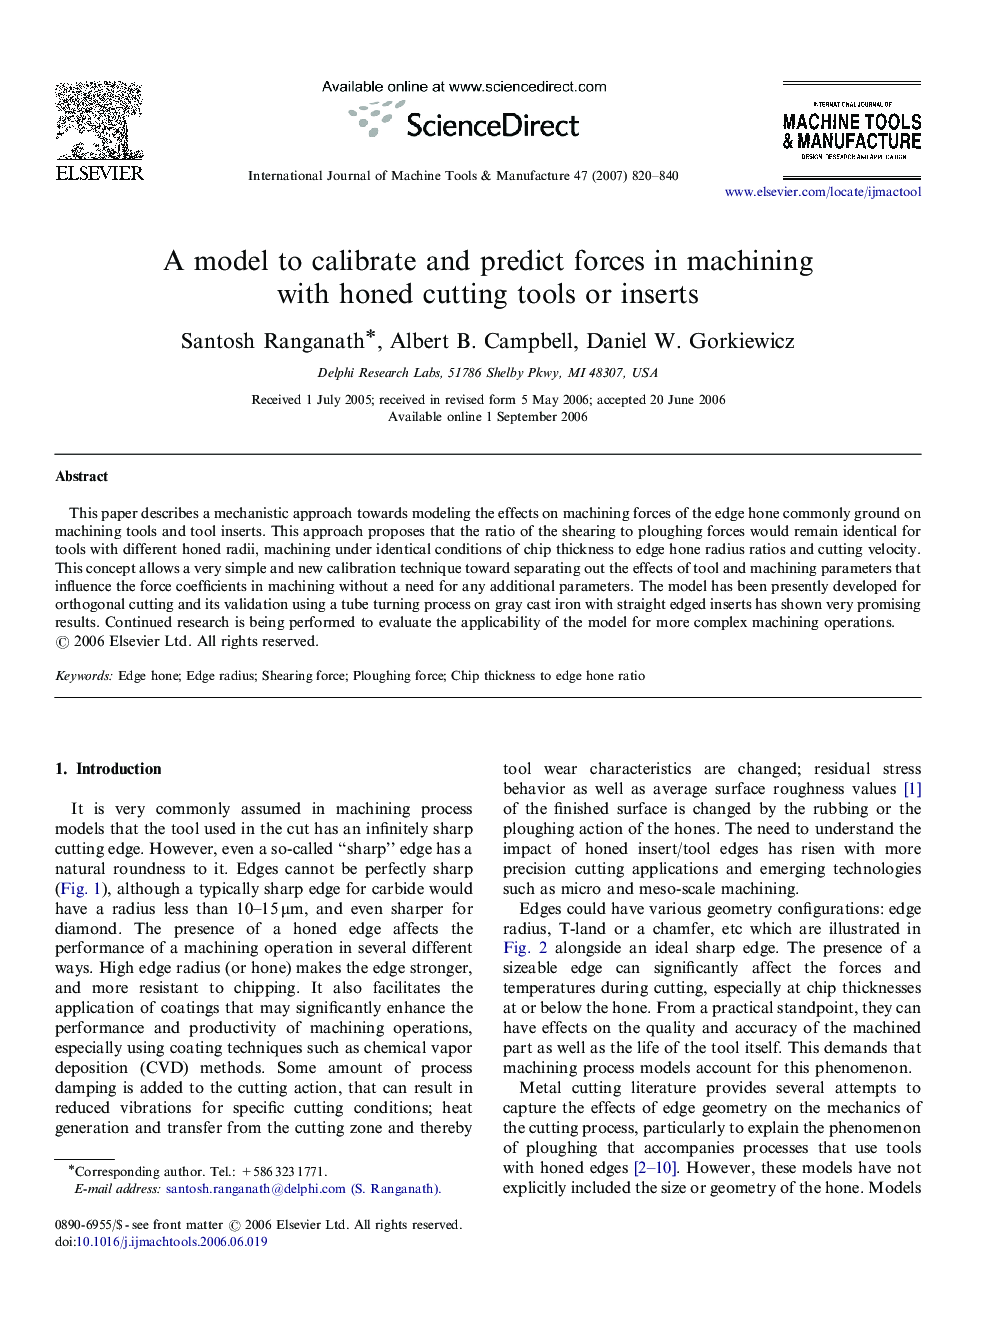 A model to calibrate and predict forces in machining with honed cutting tools or inserts